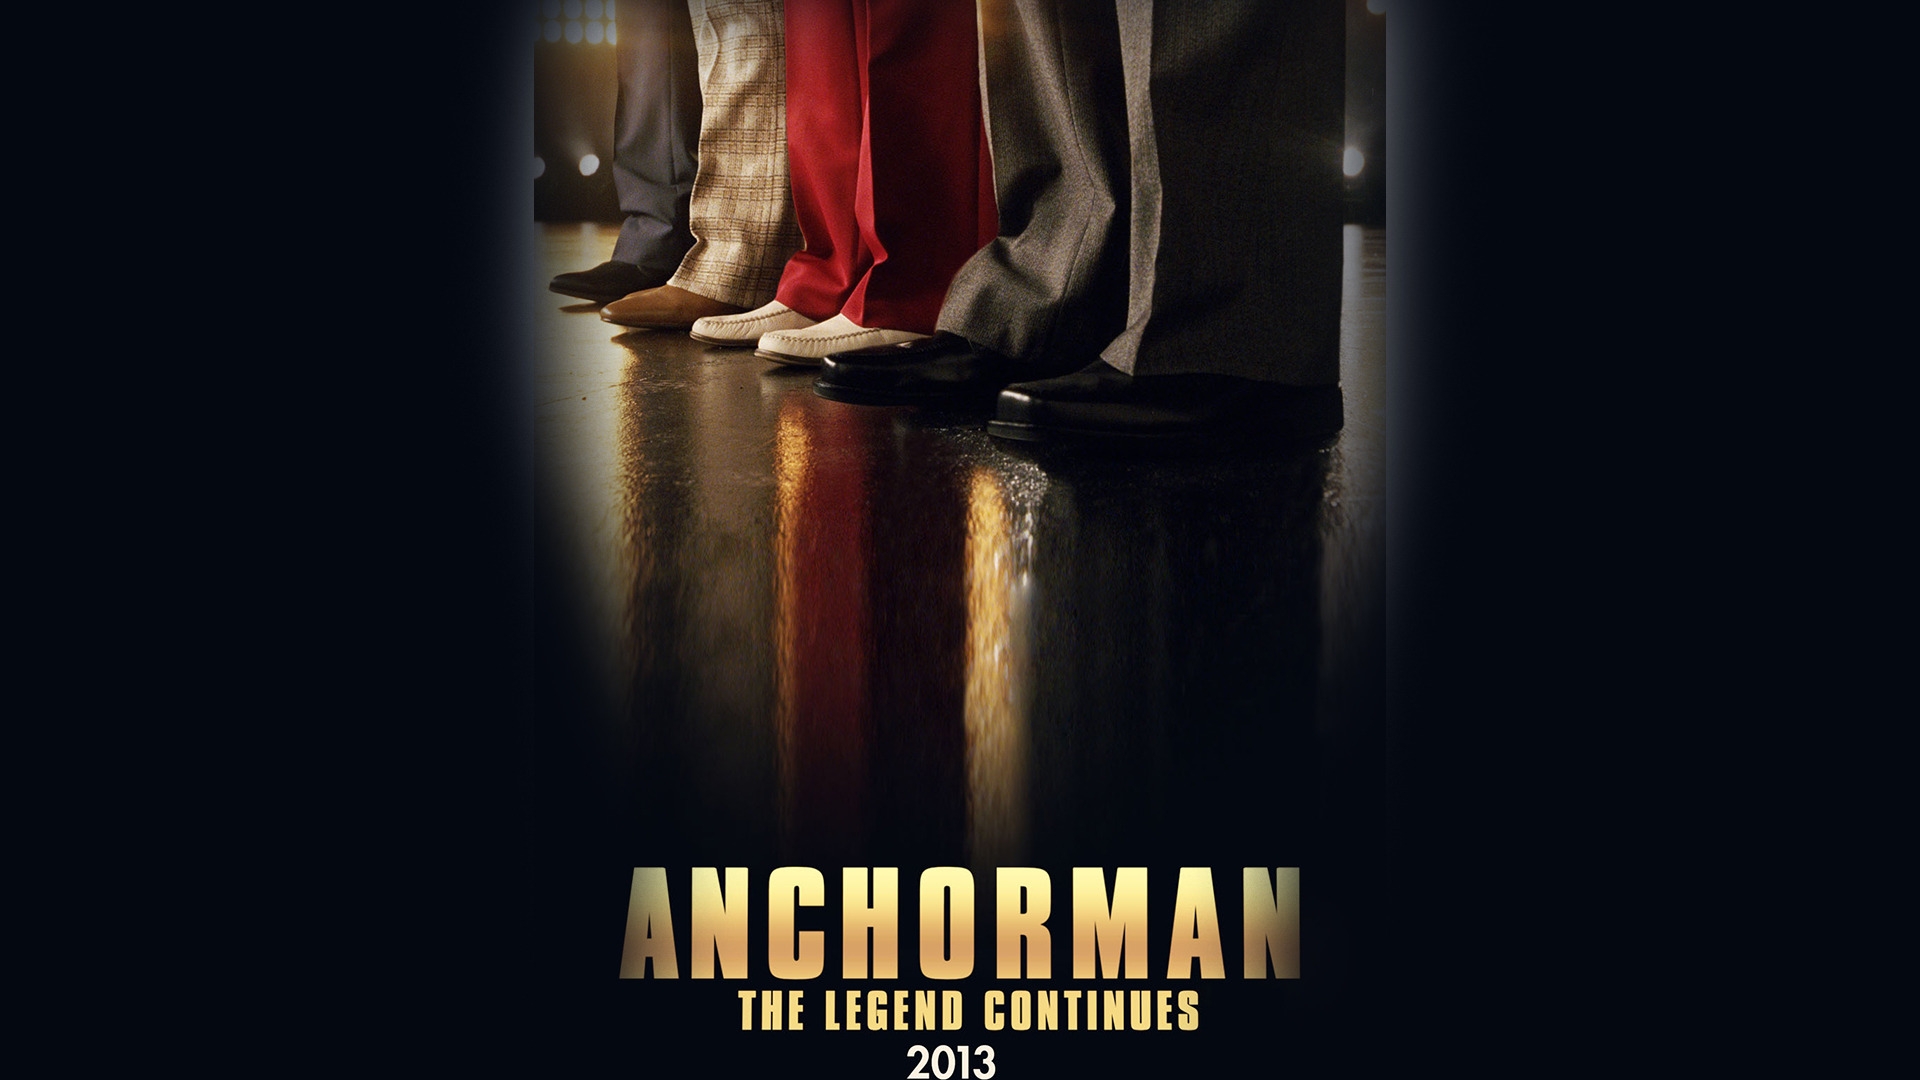 Anchorman The Legend Continues 2013 for 1920 x 1080 HDTV 1080p resolution